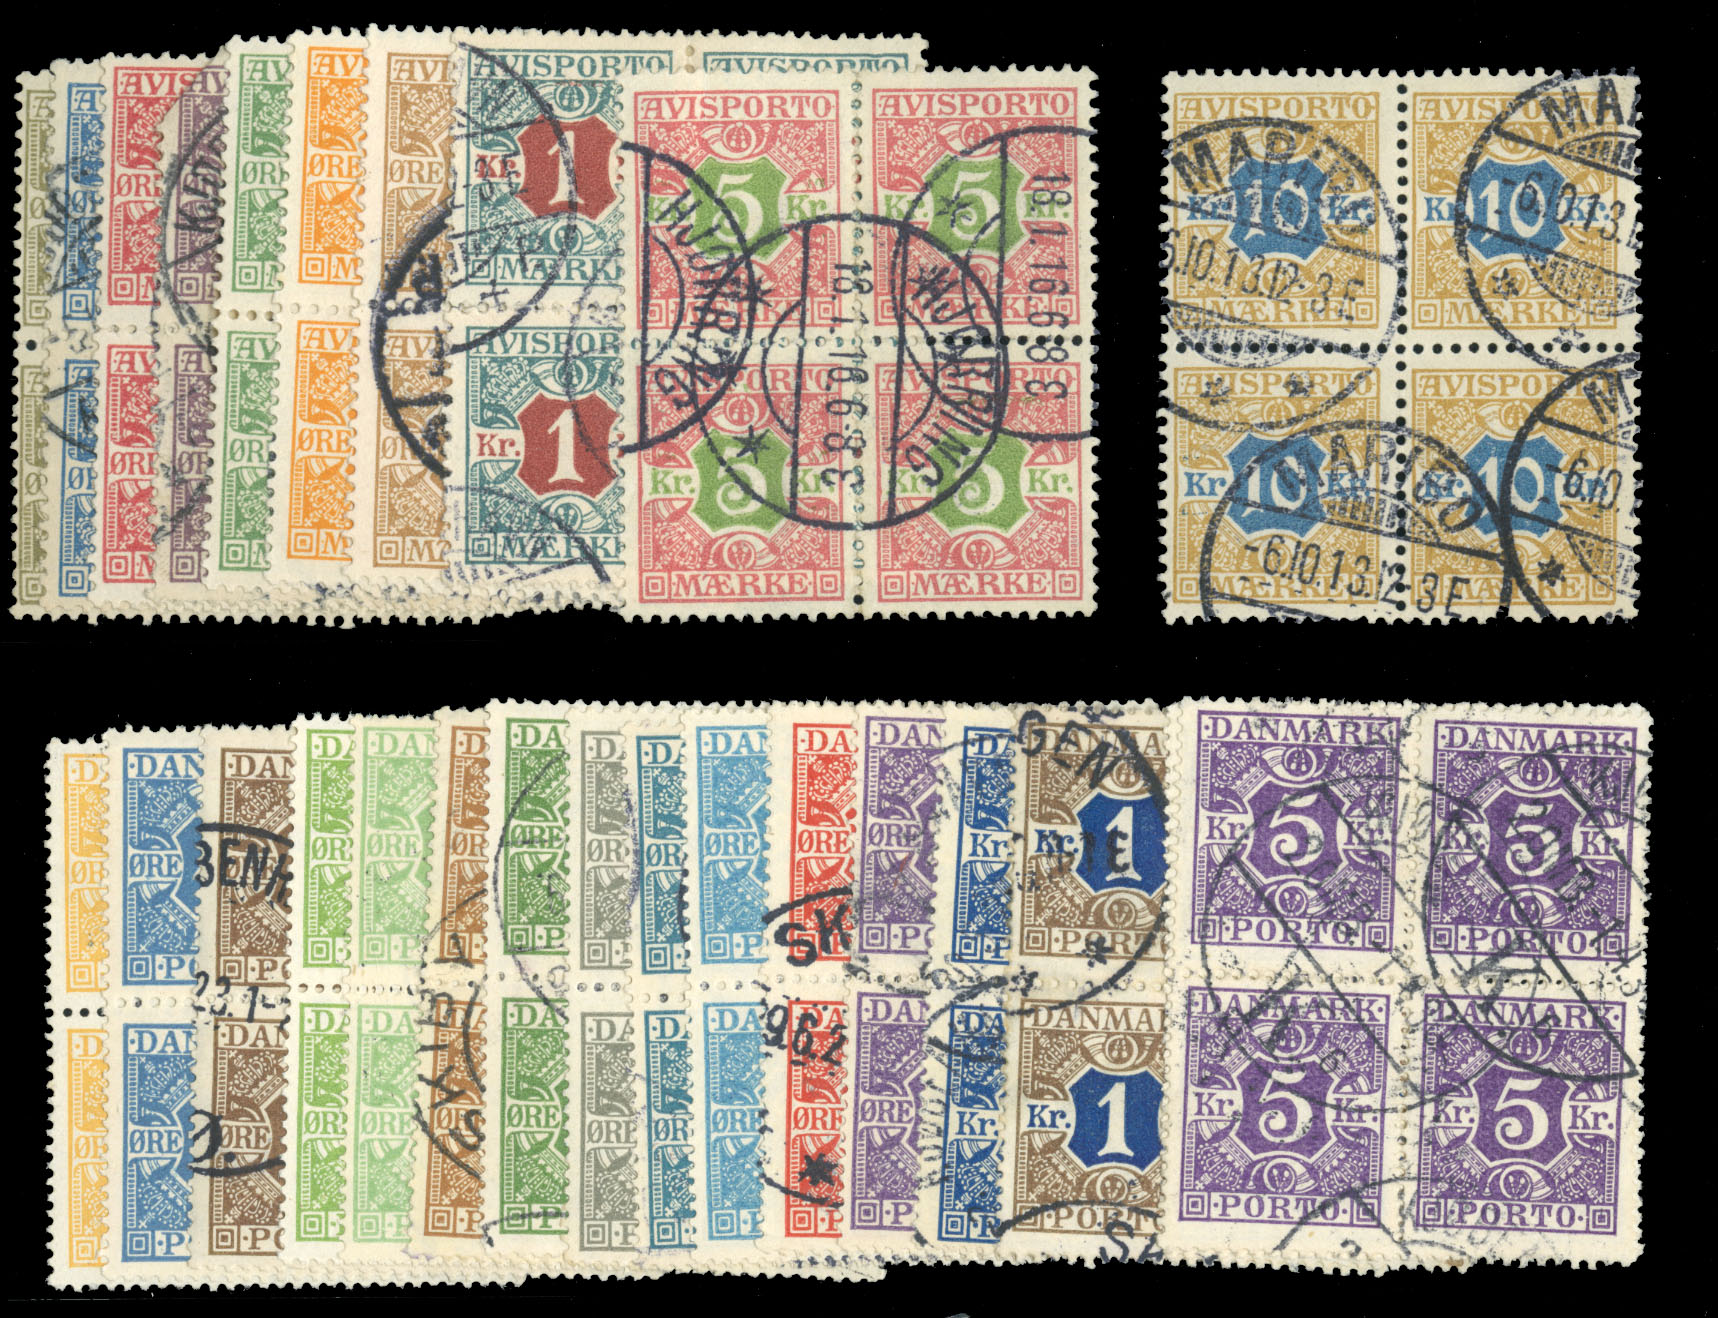 Lot 377 - Great Britain  -  Cherrystone Auctions Rare Stamps & Postal History of the World